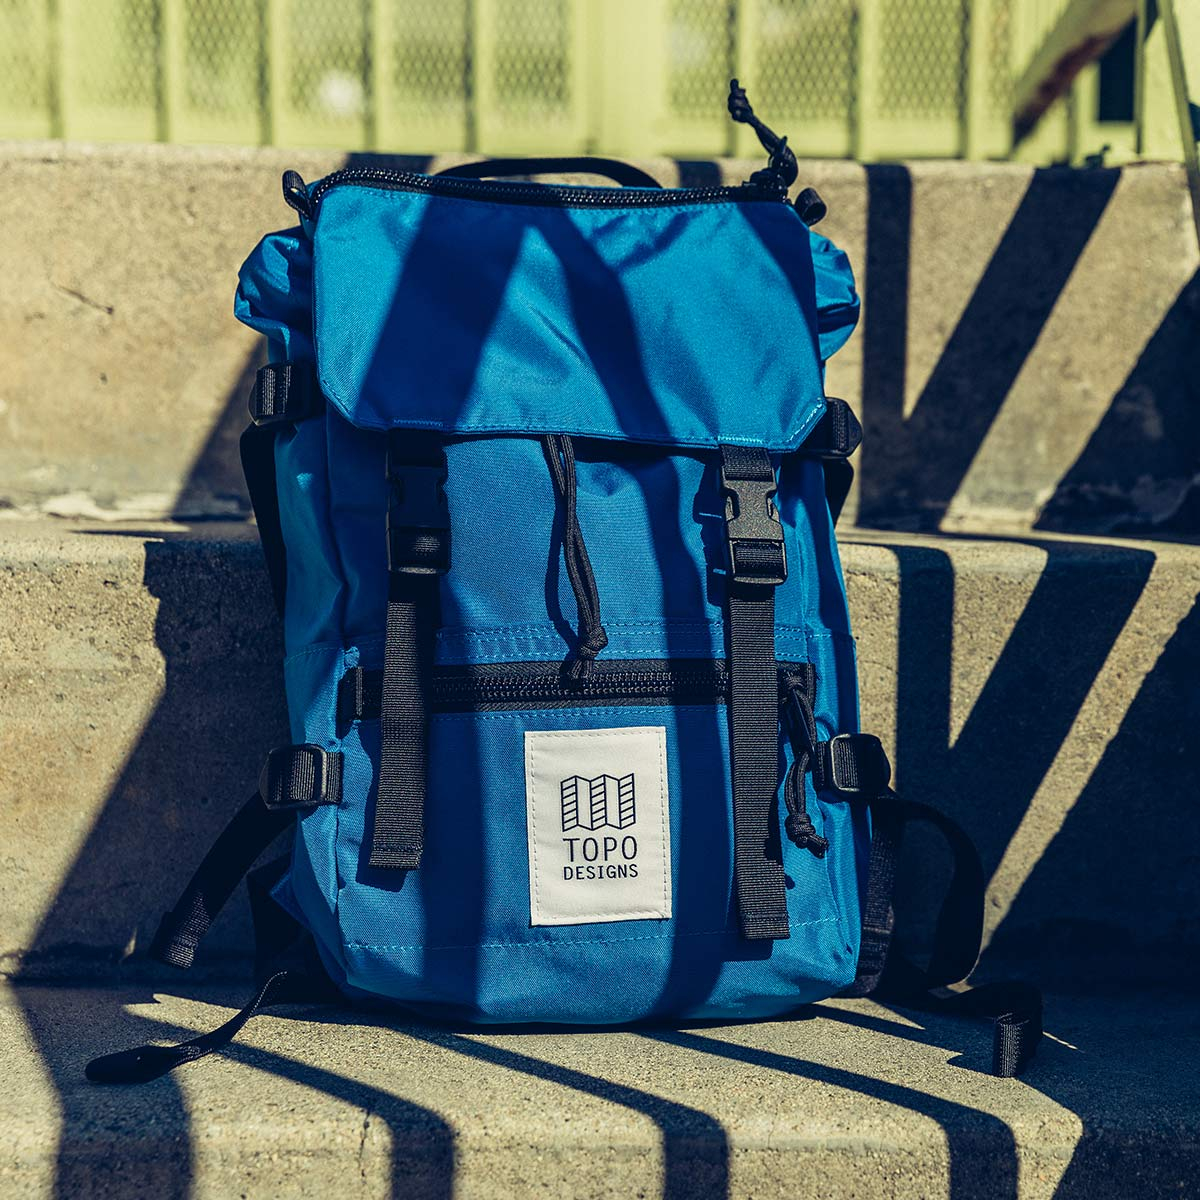 Topo Designs Rover Pack - Mini Blue-Blue, statement-making bag that’s the perfect size for errands around town or on the trail